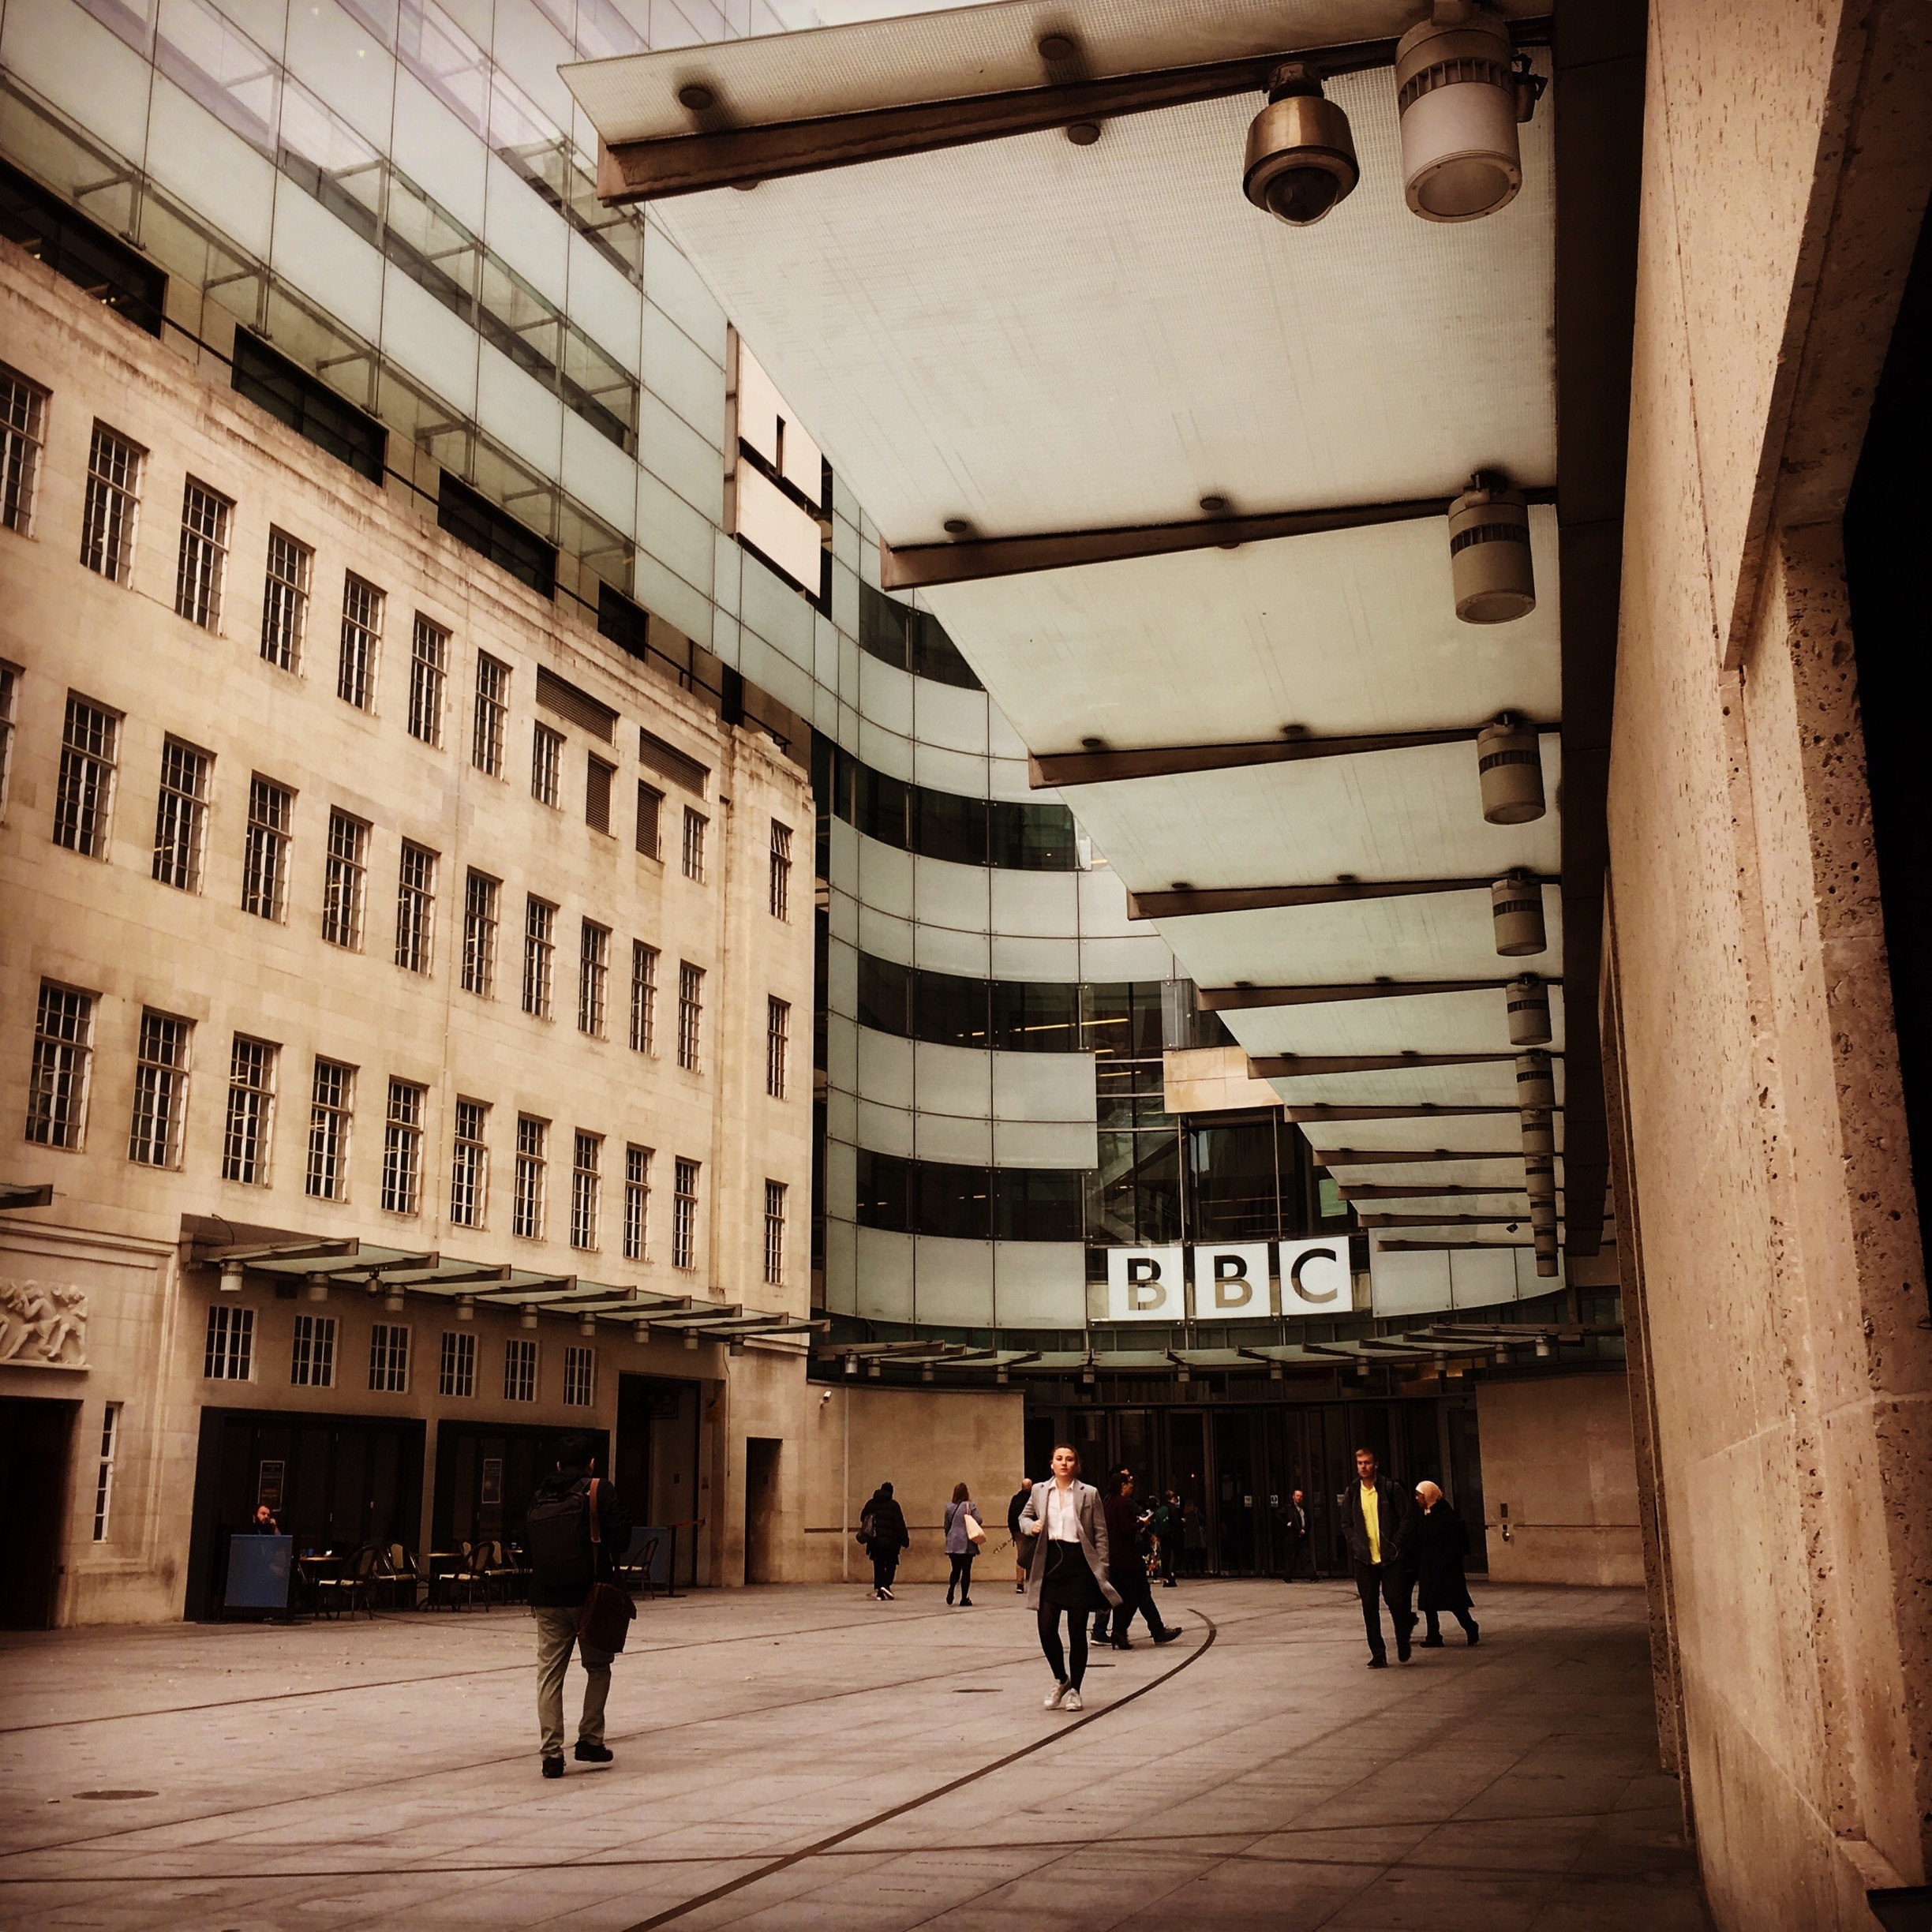 Down at BBC HQ today, lovely iconic building